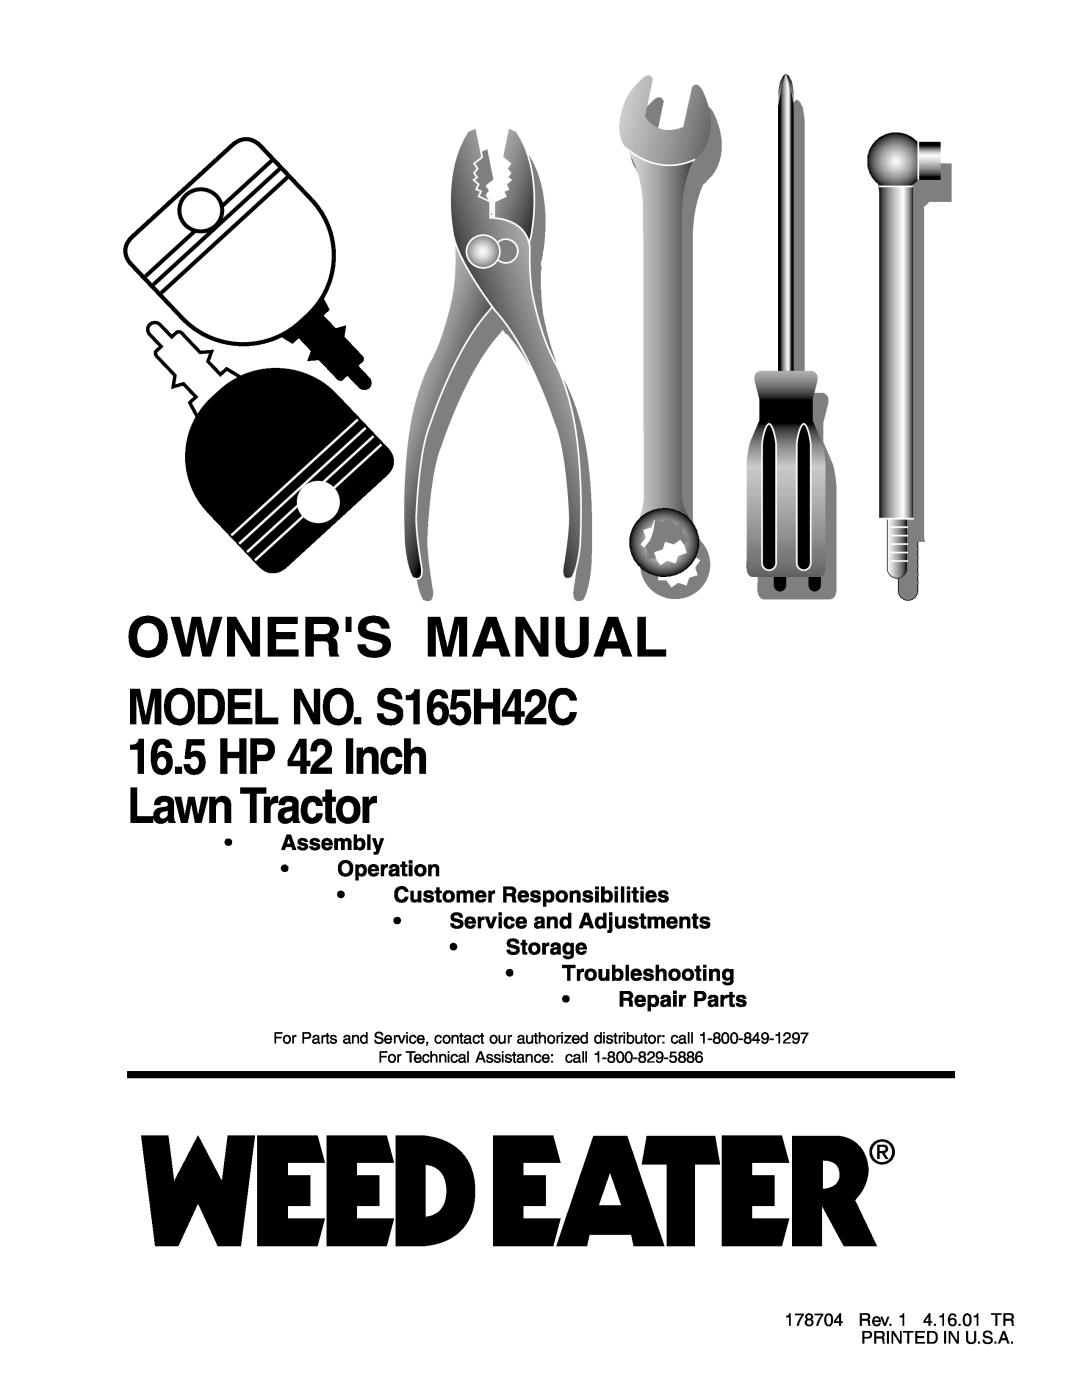 Weed Eater 178704 manual Owners Manual, MODEL NO. S165H42C 16.5 HP 42 Inch Lawn Tractor 